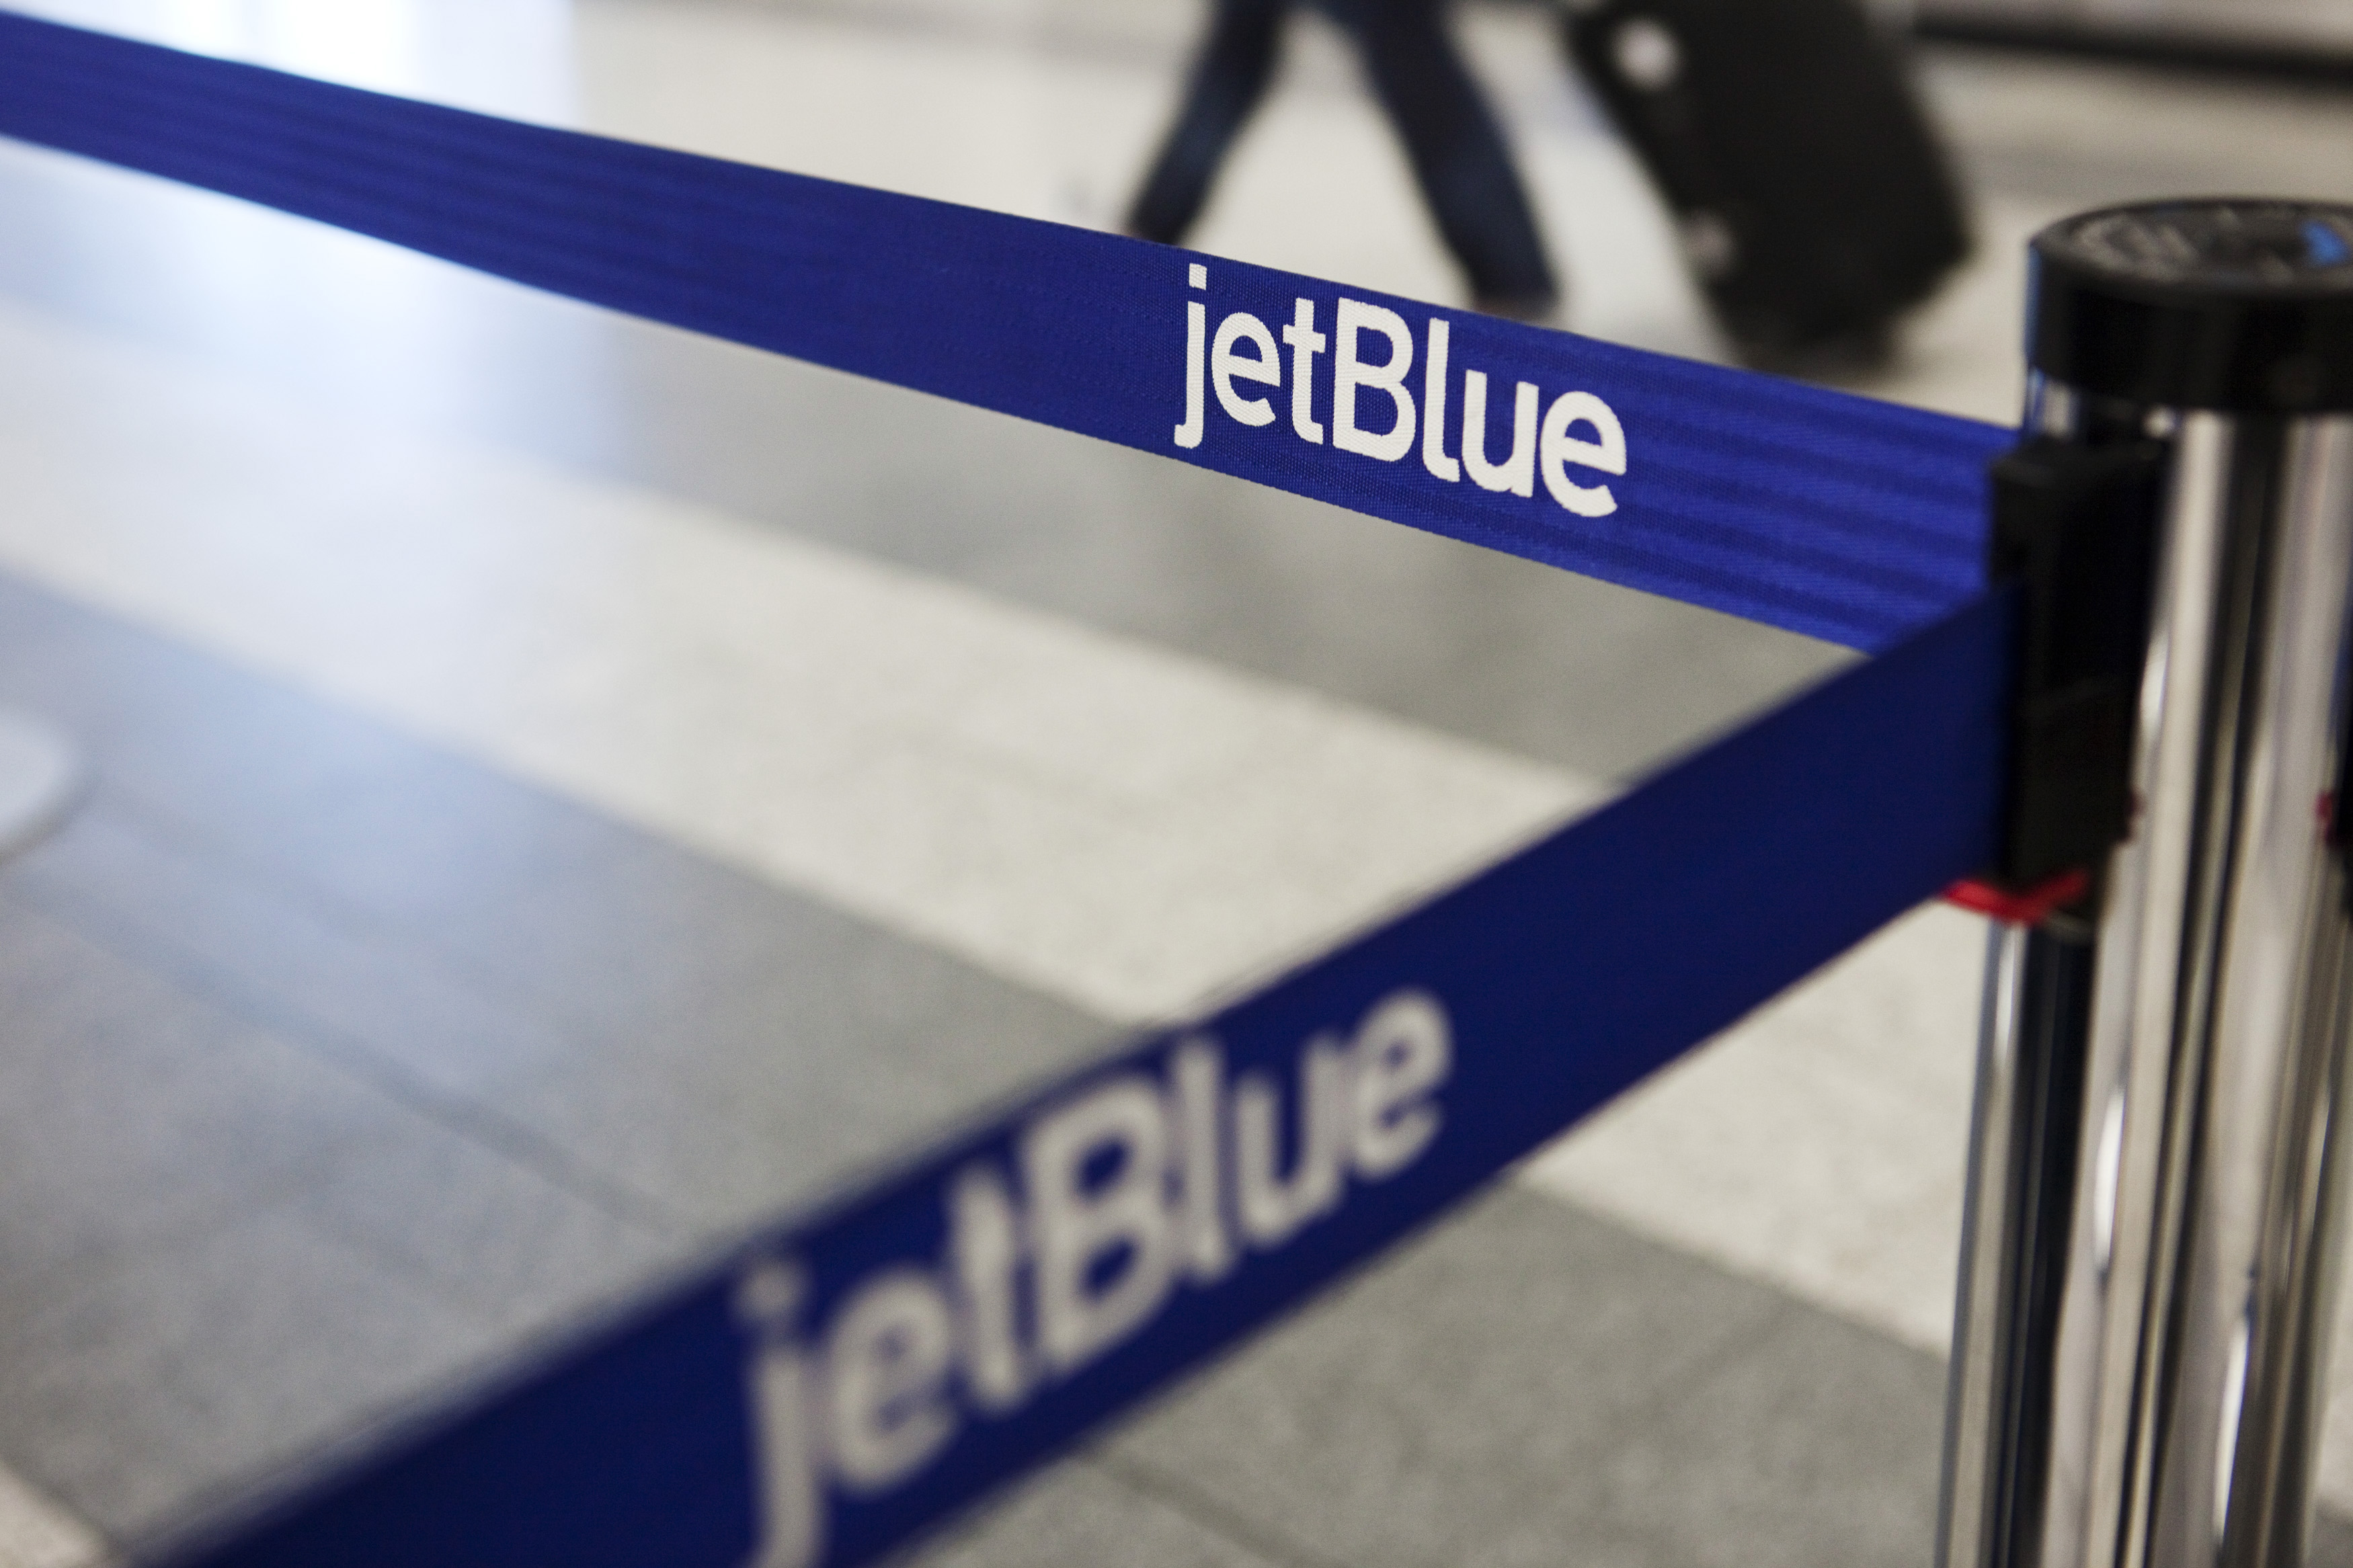 To match Feature JETBLUE/